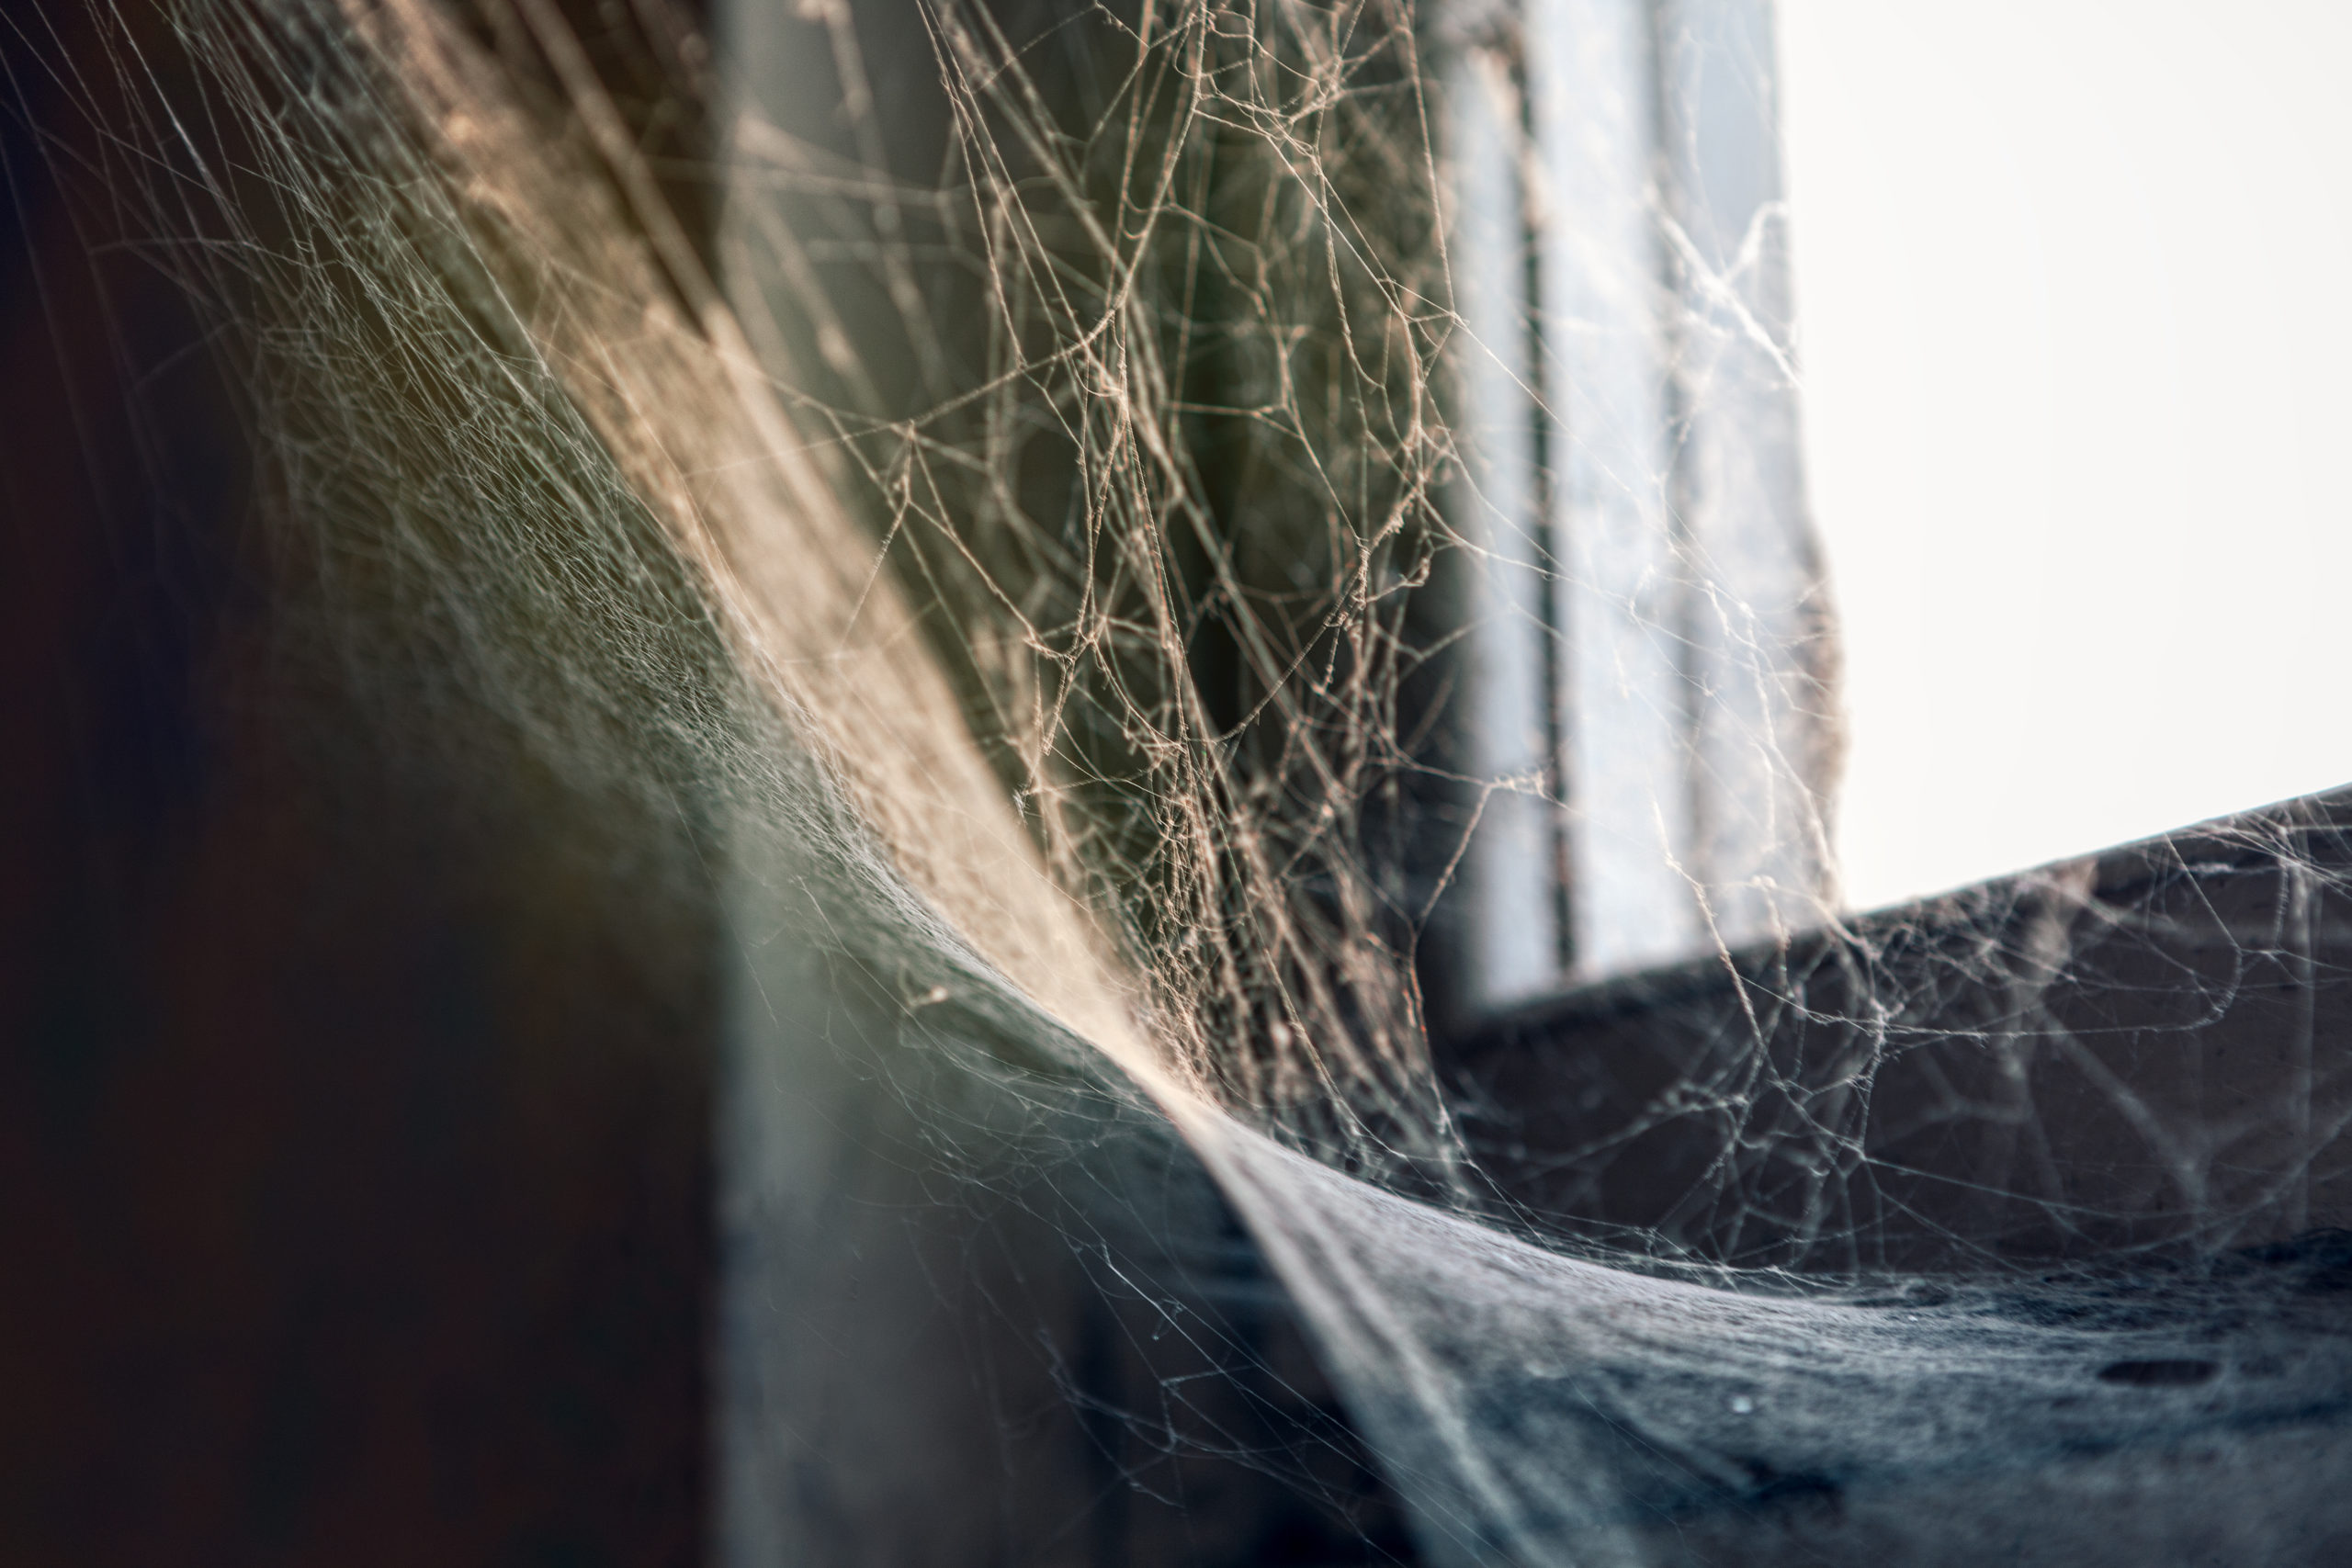 5 Spiders You Might Find in Your Home